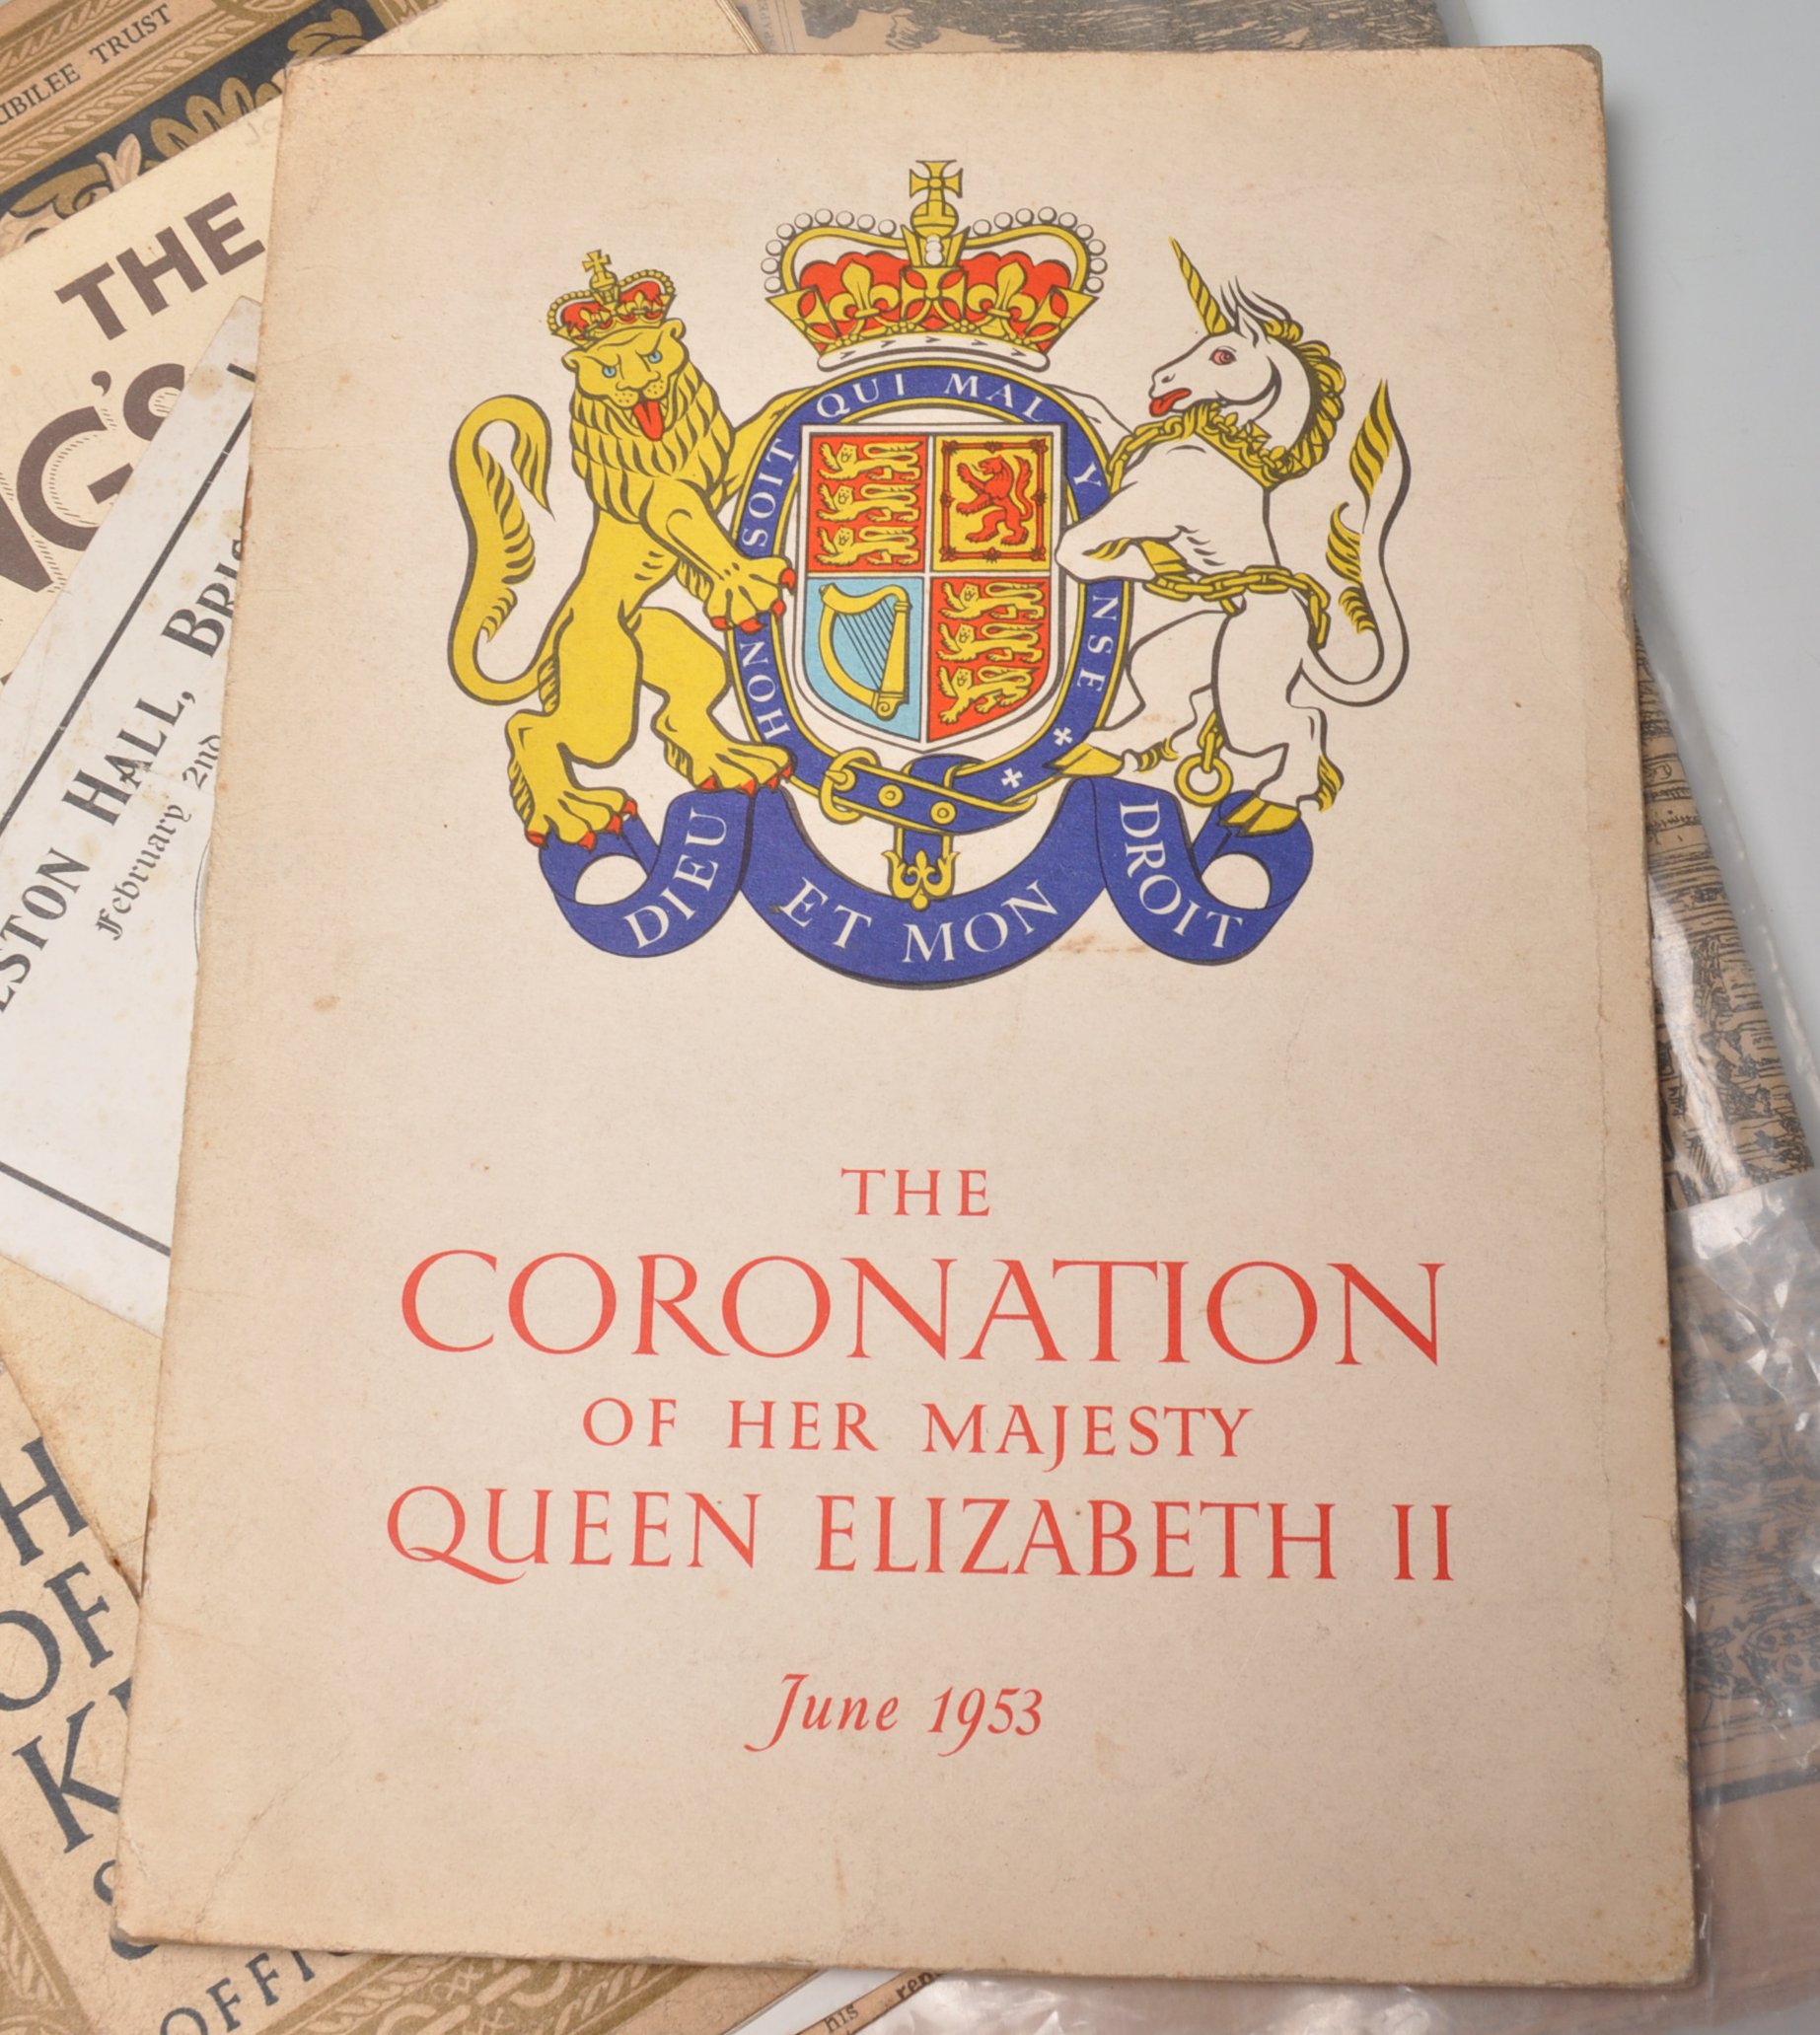 COLLECTION OF 20TH CENTURY ROYAL FAMILY EPHEMERAL - Image 7 of 14